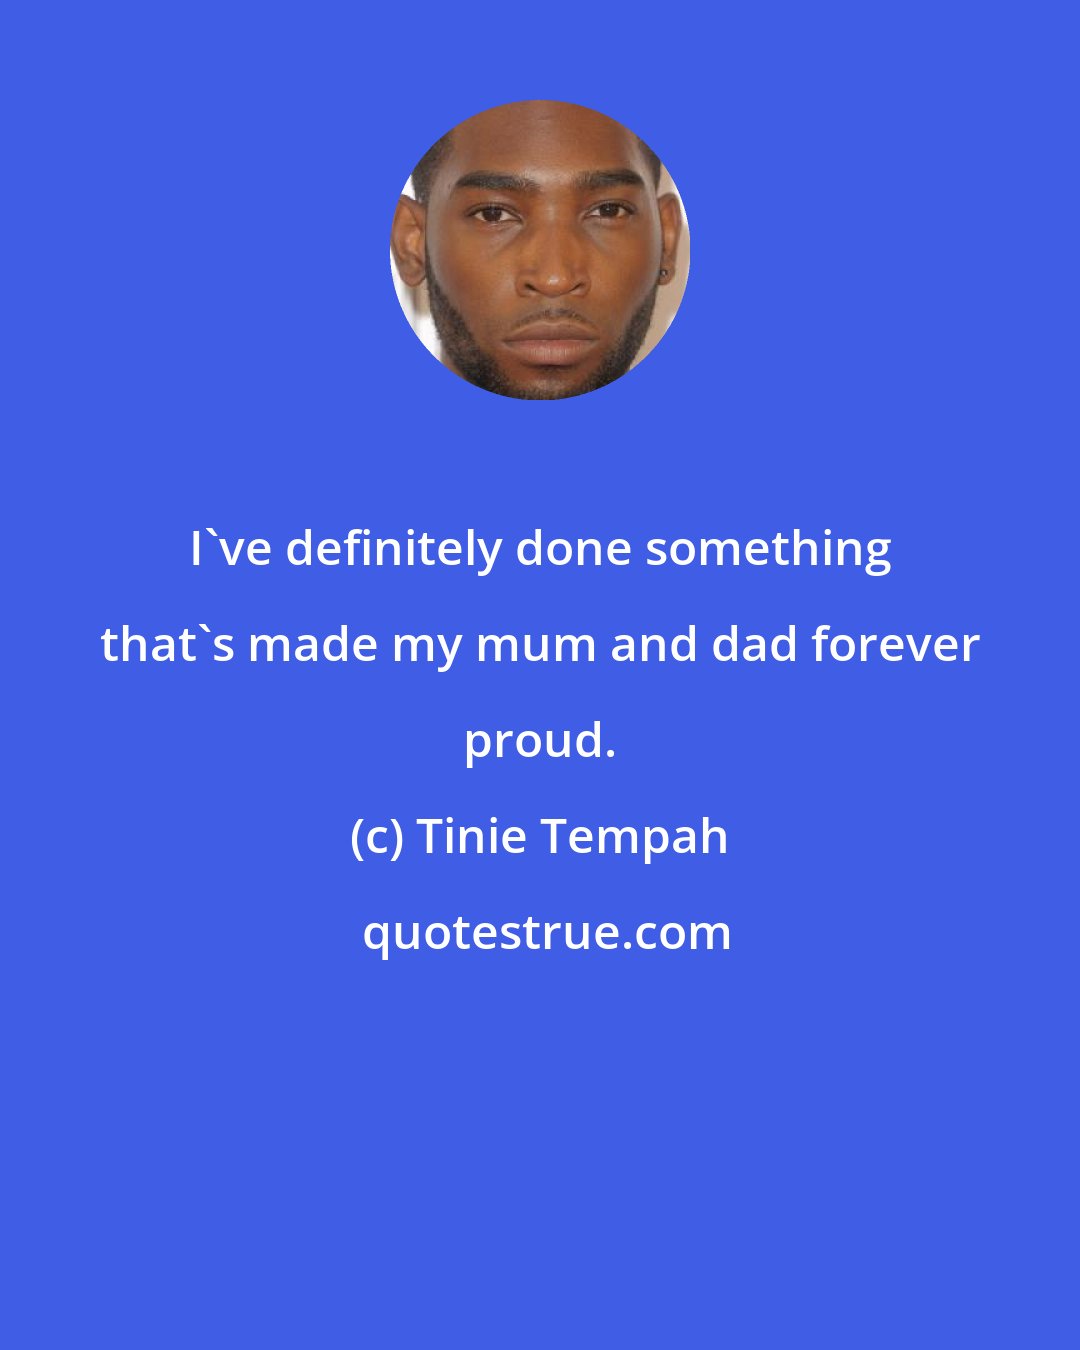 Tinie Tempah: I've definitely done something that's made my mum and dad forever proud.